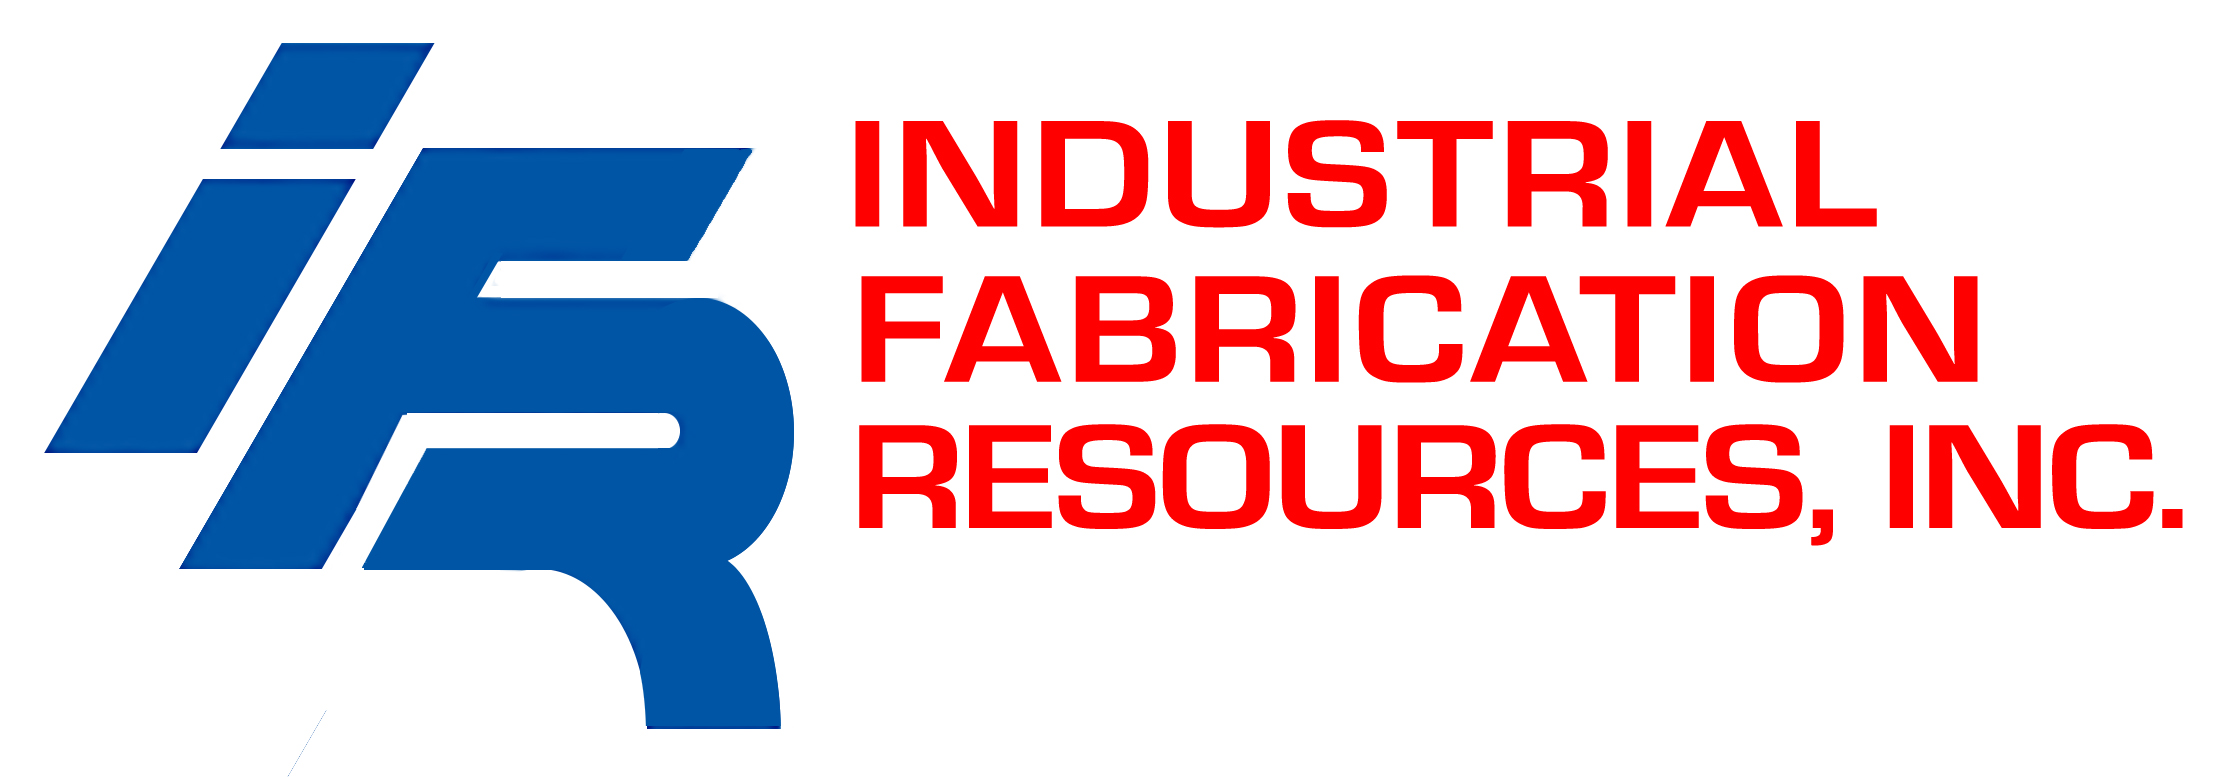 LG-Industrial-Fabrication-RESOURCES-logo-T